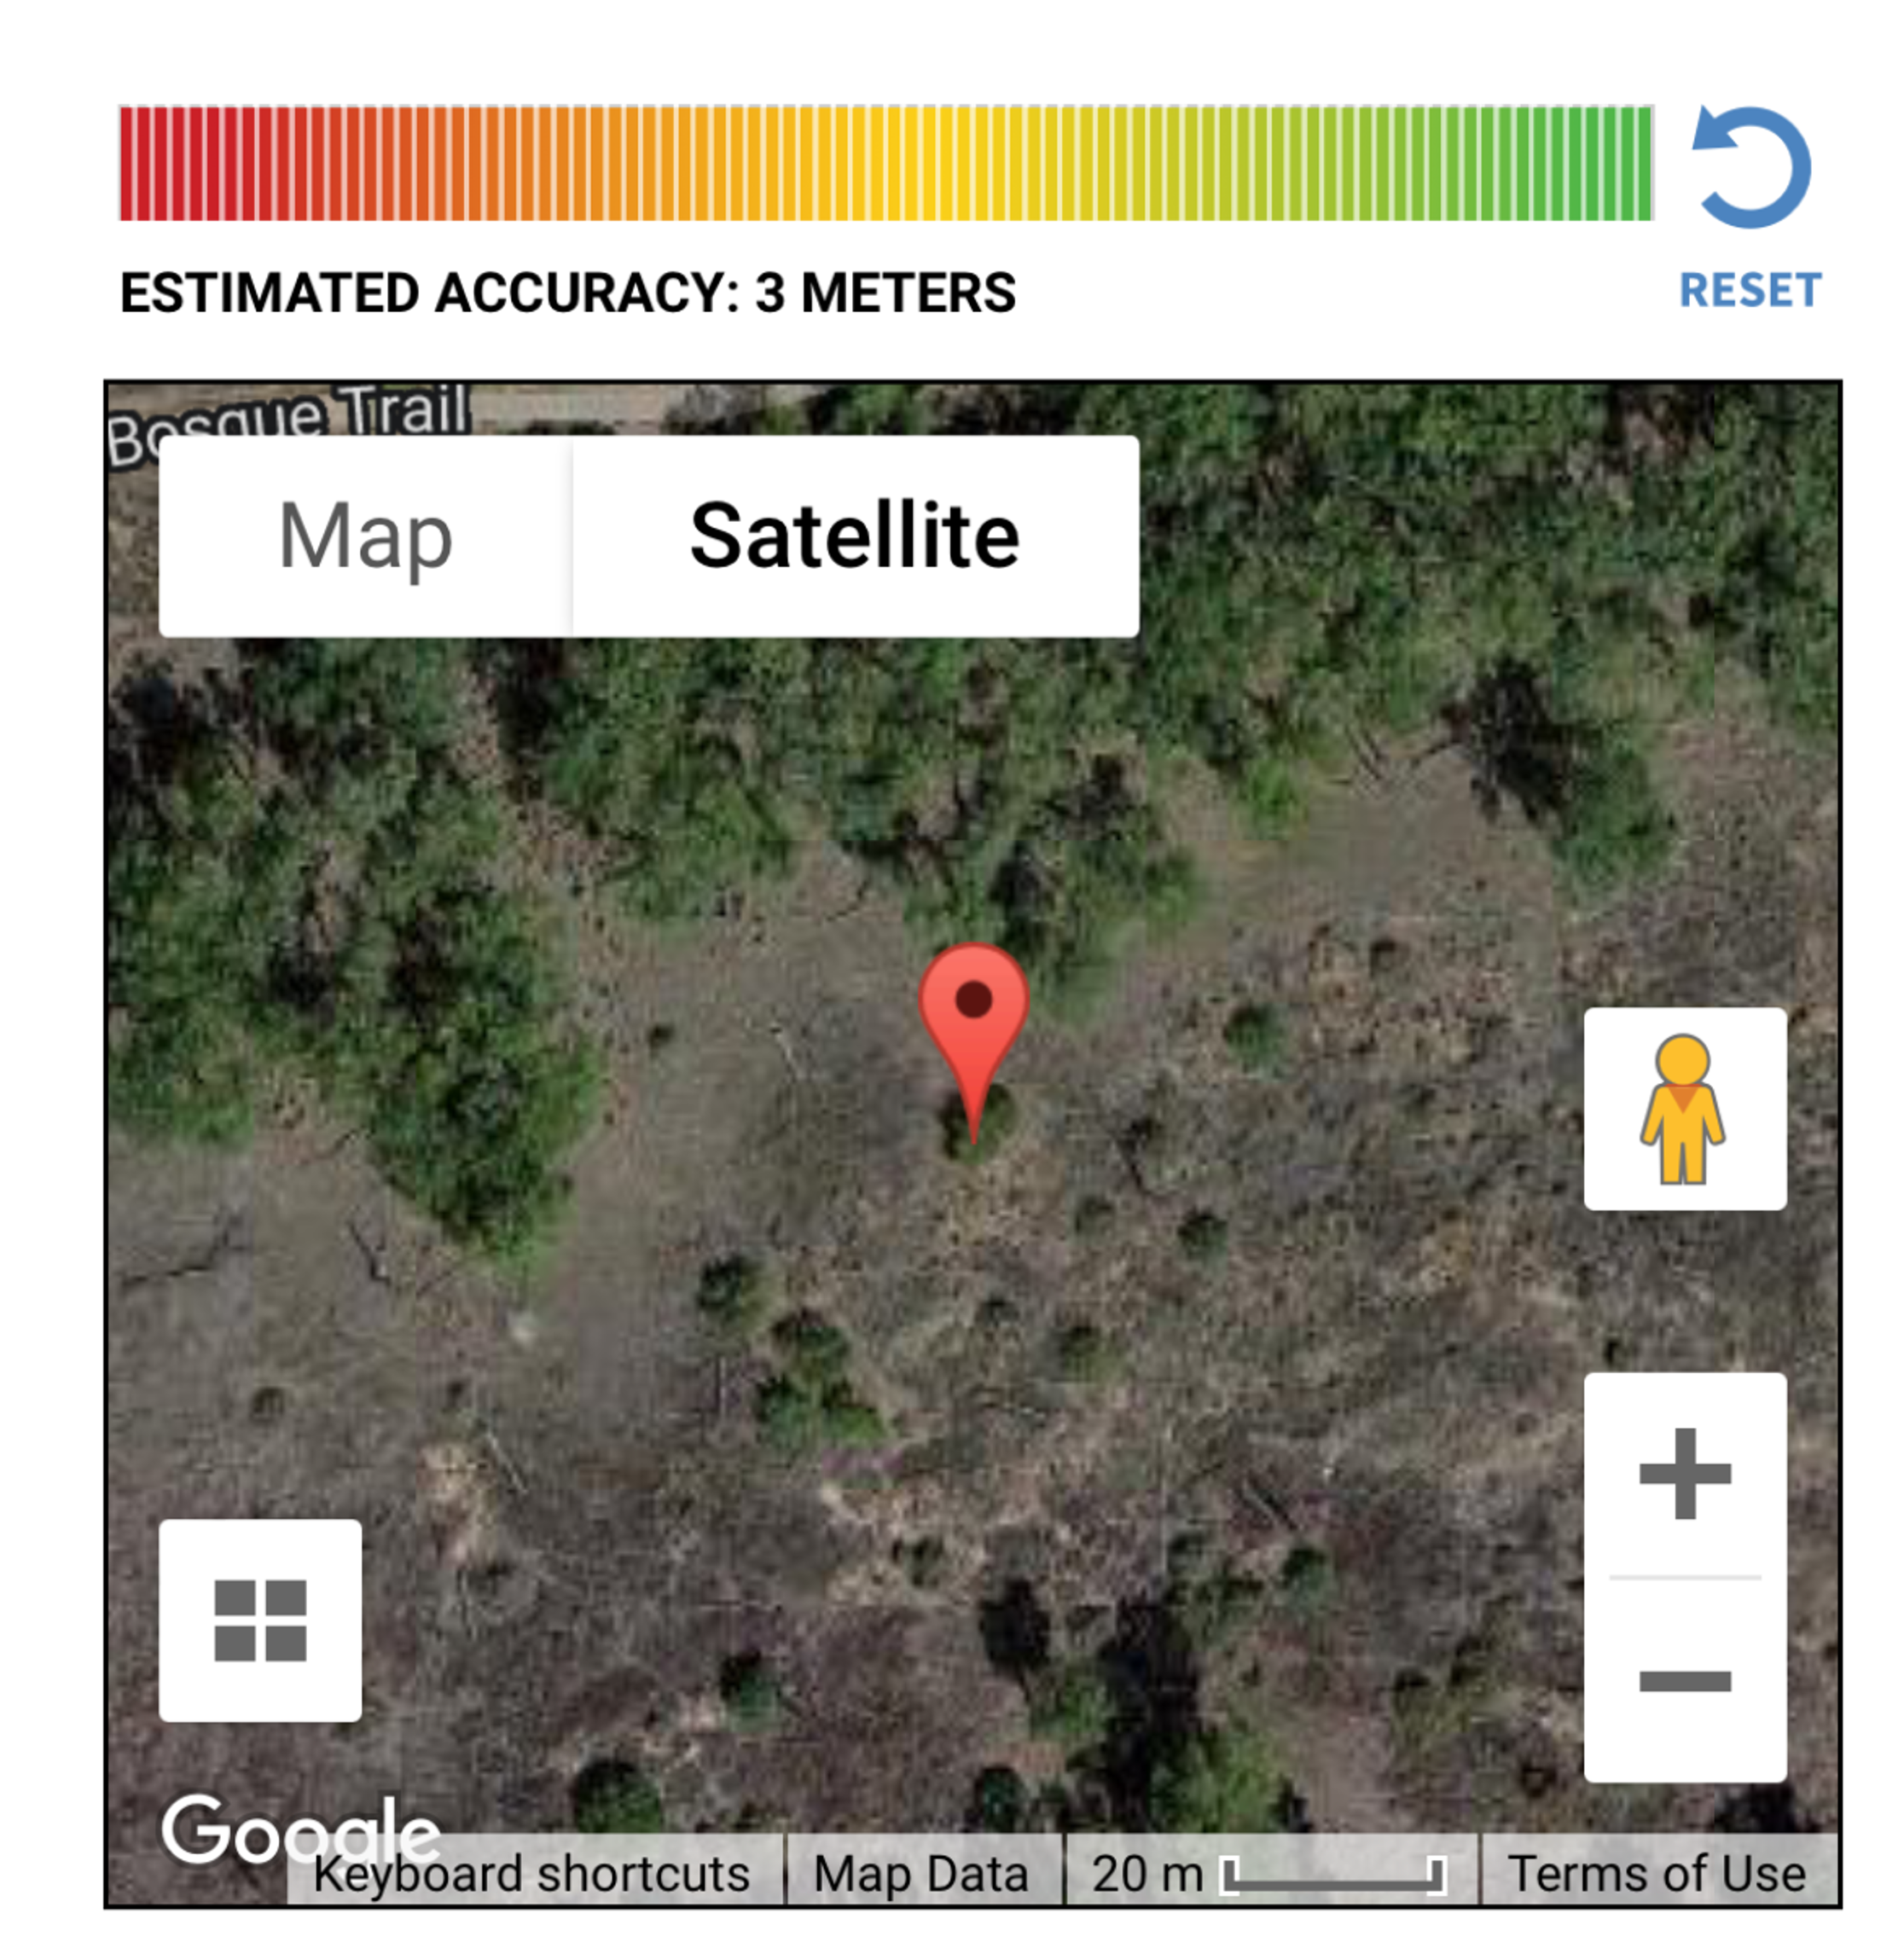 A screen from the app showing the estimated accuracy bar and a the value of 3 meters, above a map with a satellite image background and a pin marking a particular tree being measured.